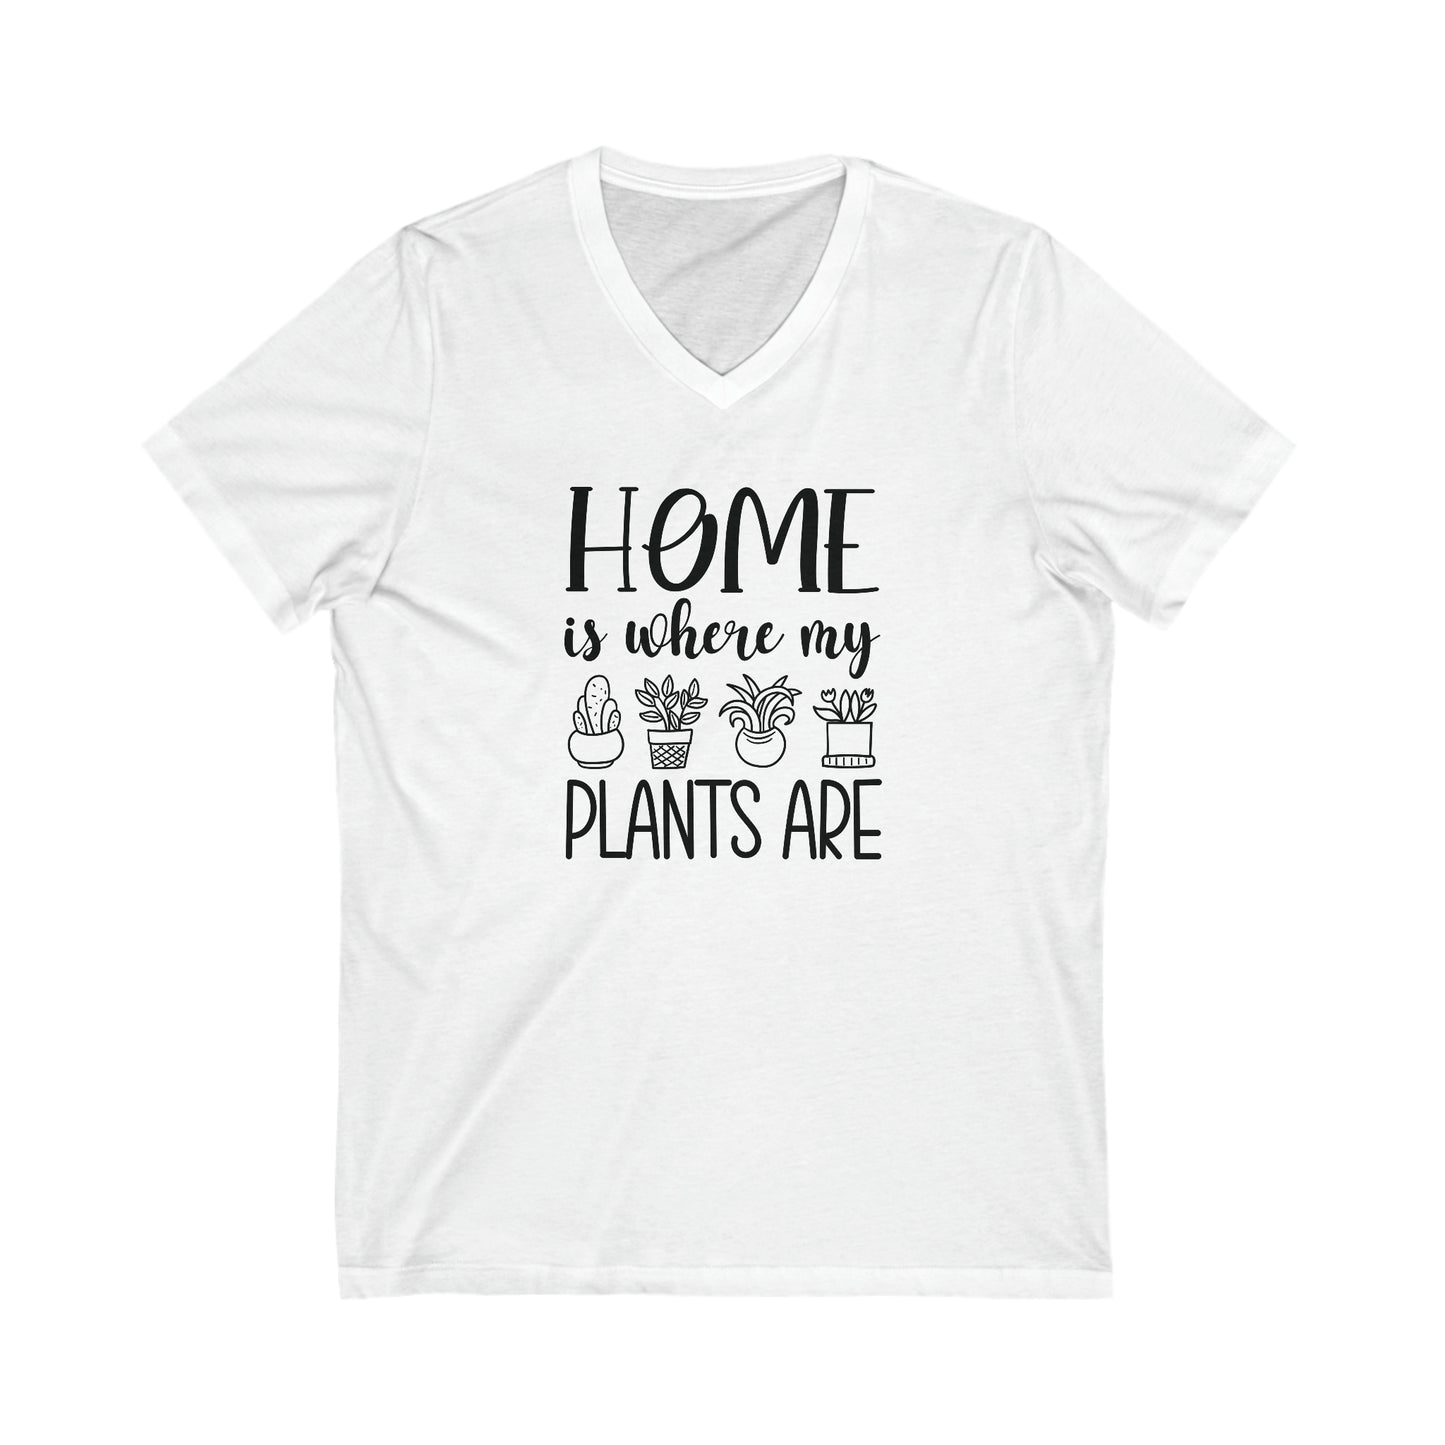 Plants Are Home Jersey Short Sleeve V-Neck Tee